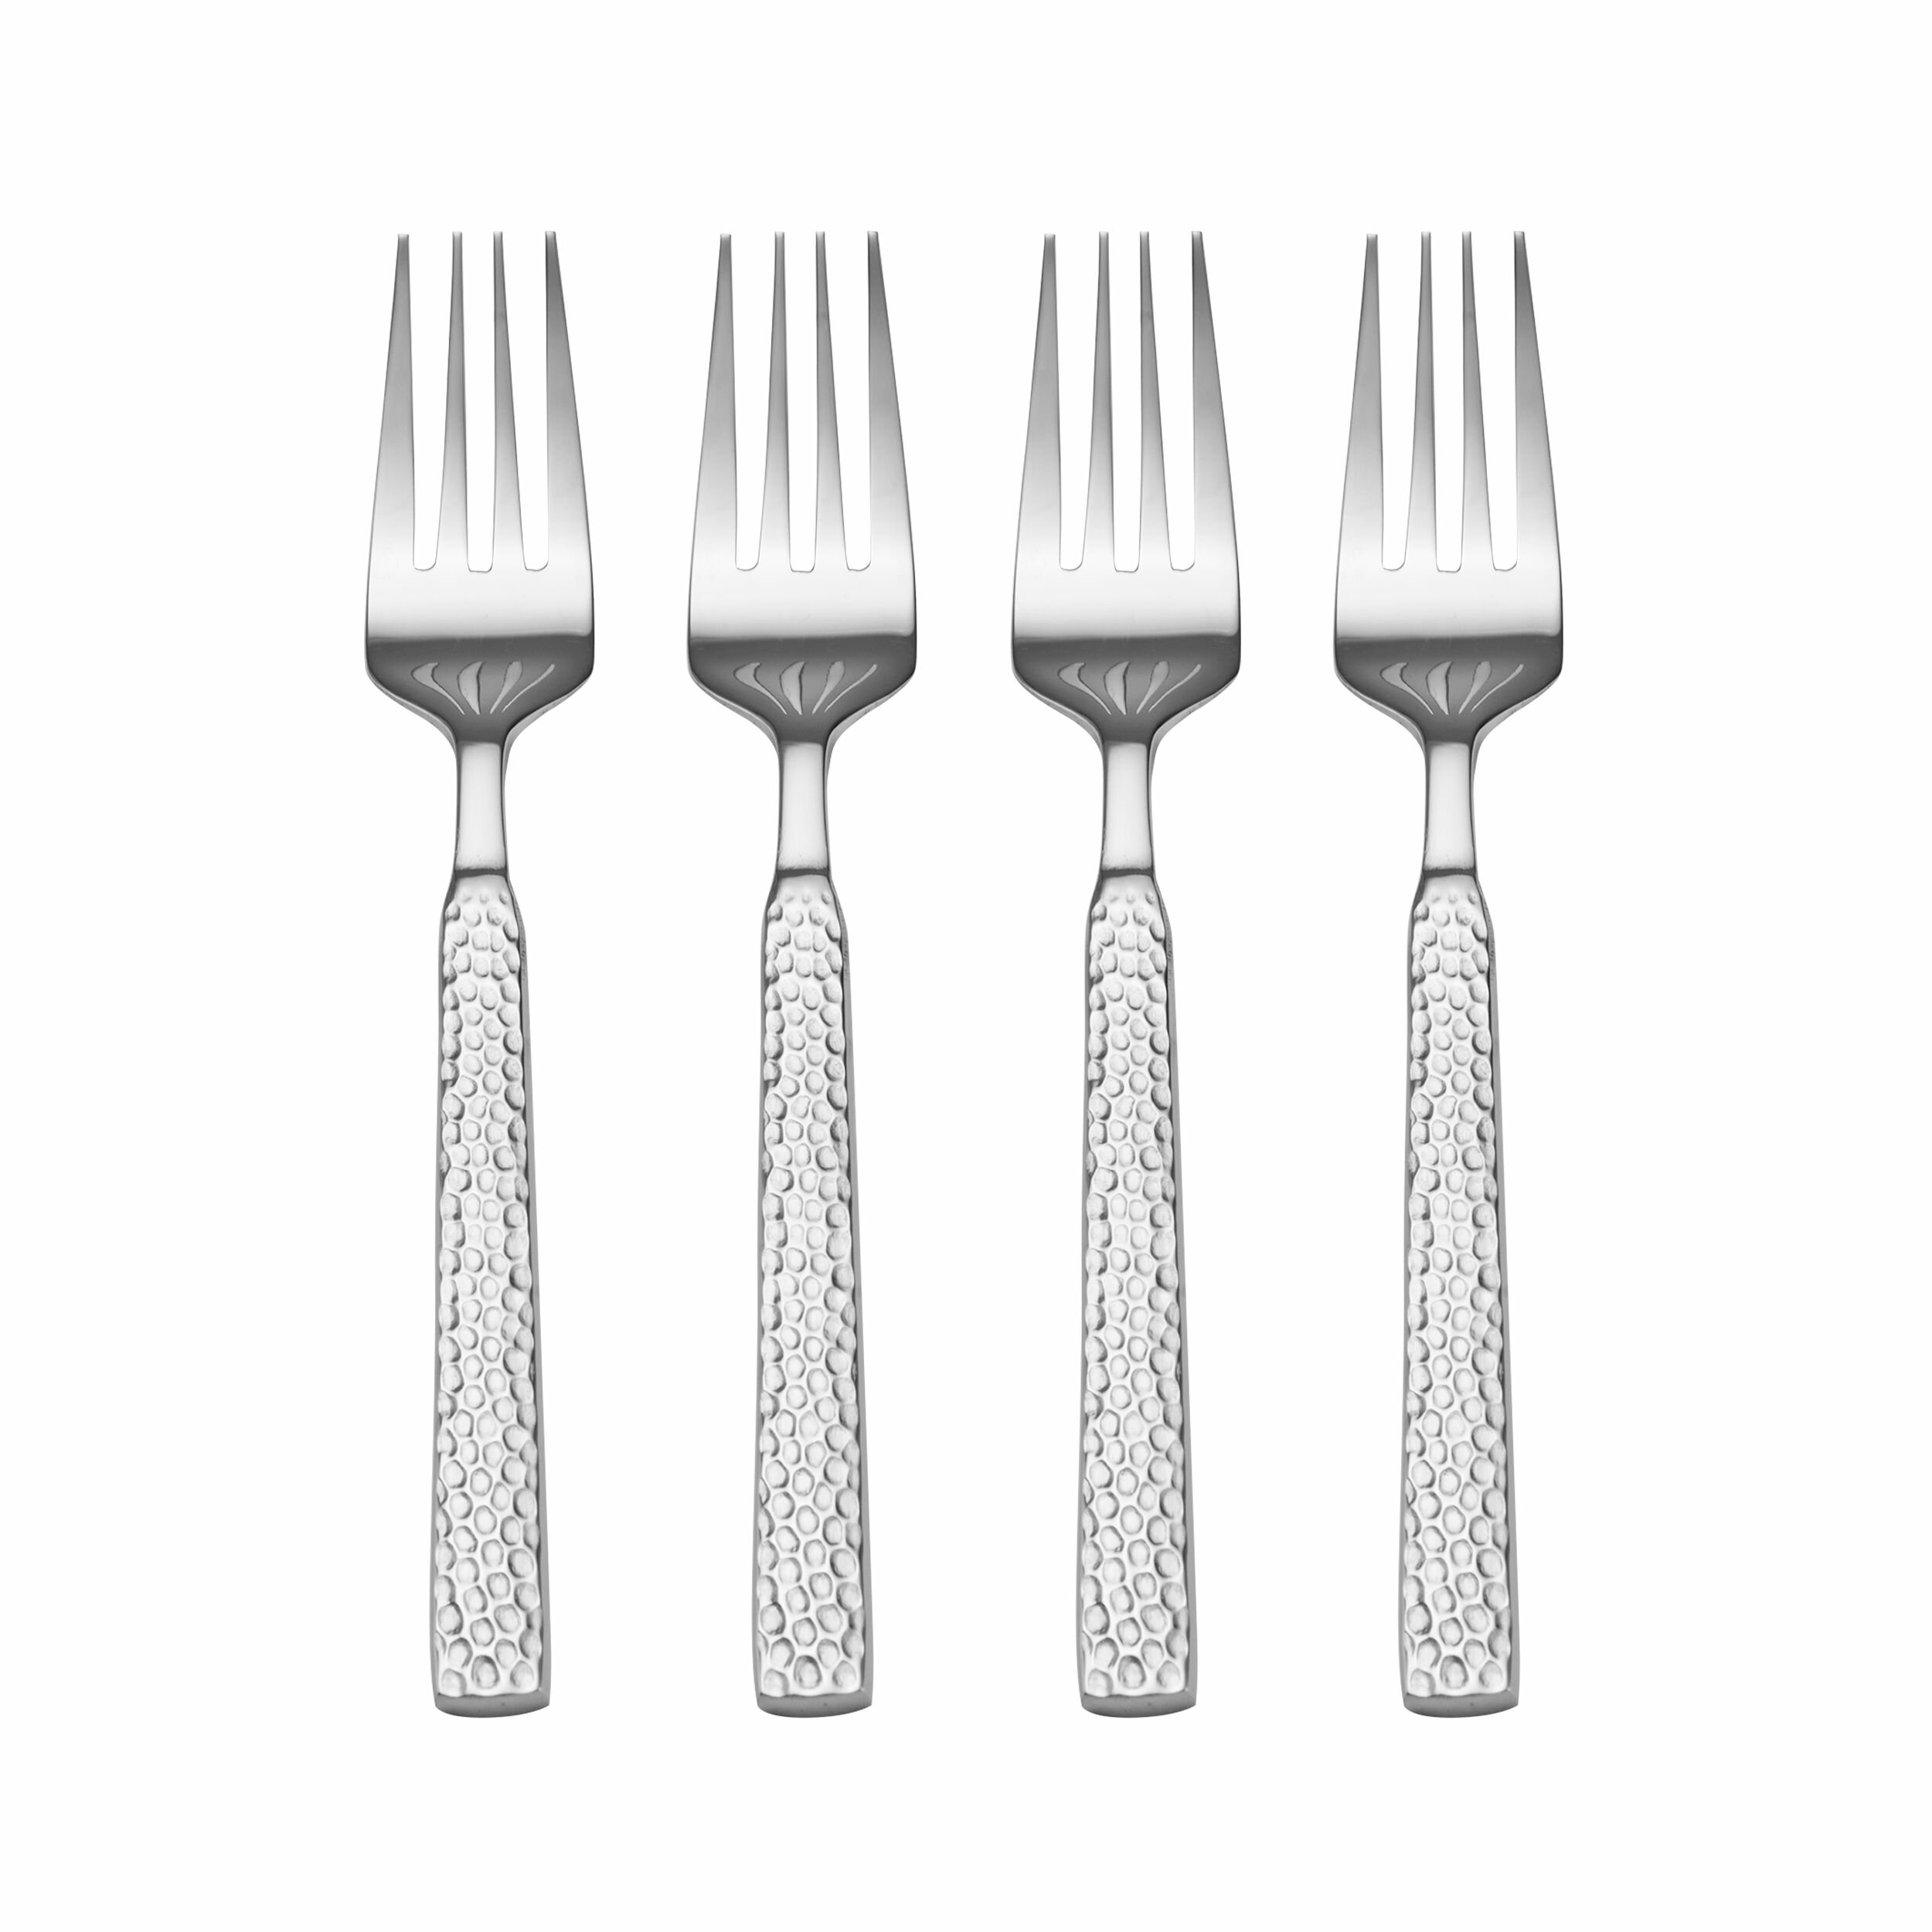 Towle Living Wave 42-Piece Flatware Set Stainless Steel